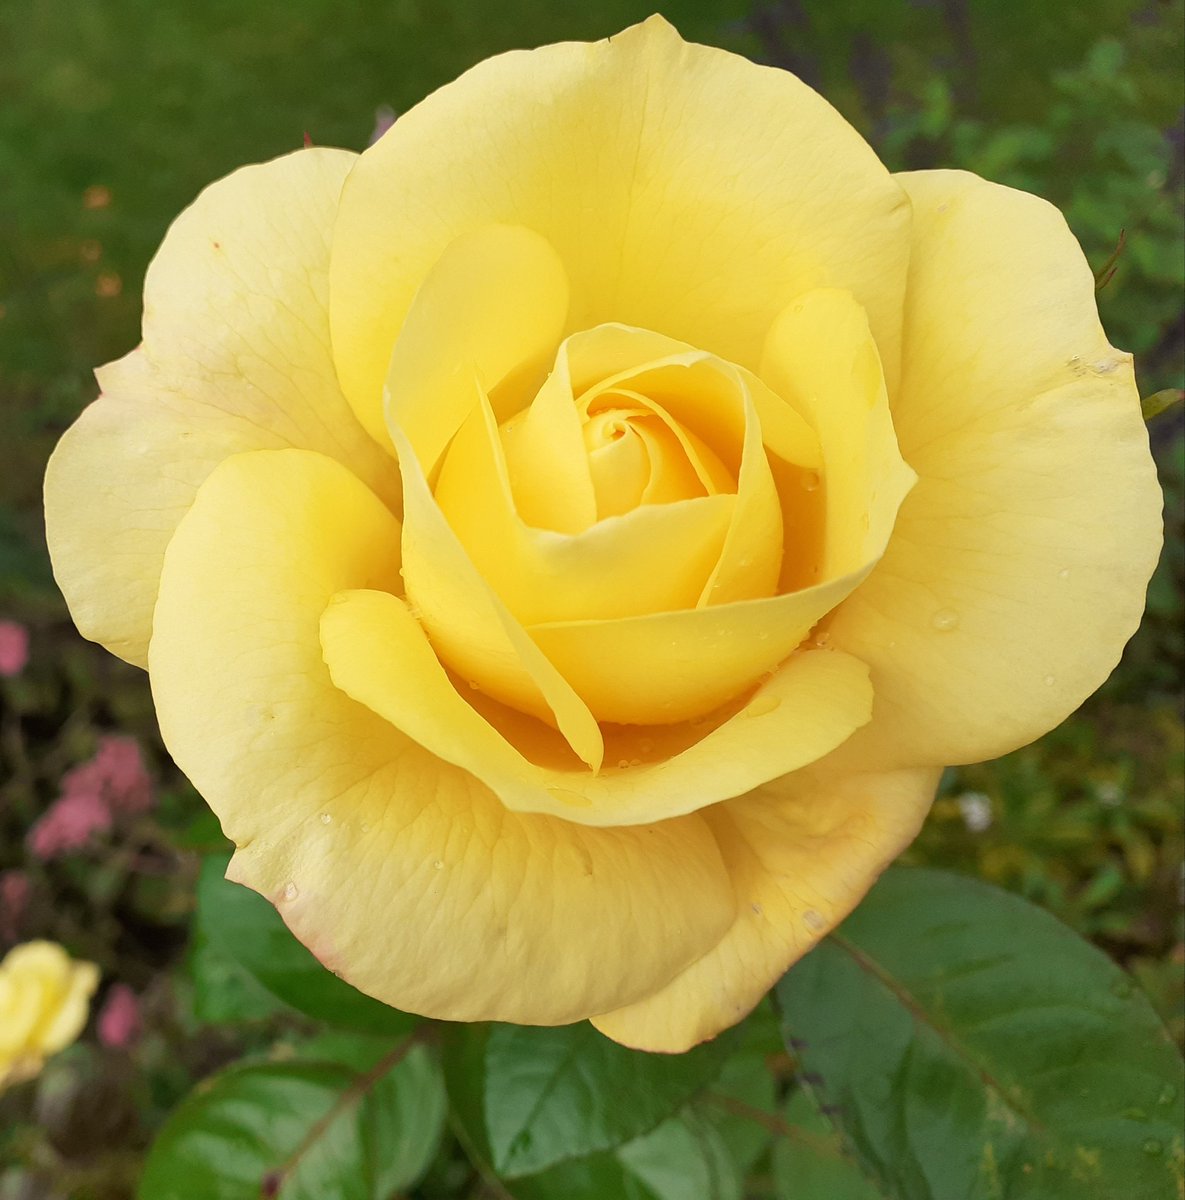 A yellow rose for #RoseWednesday today. Thinking especially of all those special people working hard to raise money for #ChildrenInNeed 💛
#DailyBrightness #Gardening #gardeningx #GardeningTwitter #kindness